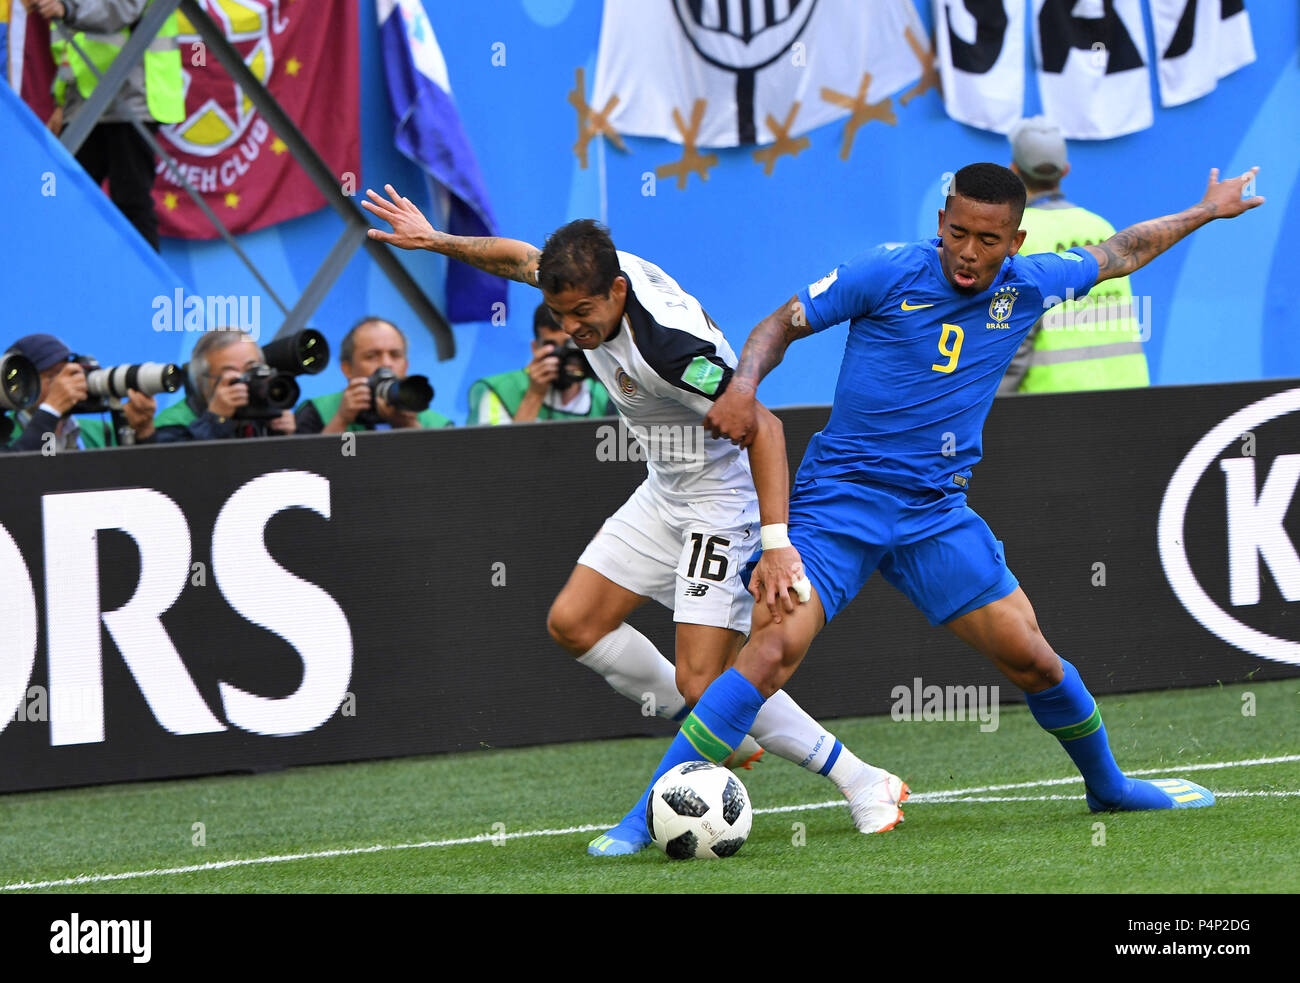 St. Petersburg, Russia. 22nd June, 2018. Russia, St. Petersburg, on June 22, 2018. 2018 FIFA World Cup Russia. The match of the group stage of the FIFA World Cup - 2018 between national teams of Brazil and Costa Rica. In the picture: the player of Brazil Gabriel Zhezus and the player Costa - Ricky Cristian Gamboa. Credit: Andrey Pronin/ZUMA Wire/Alamy Live News Stock Photo